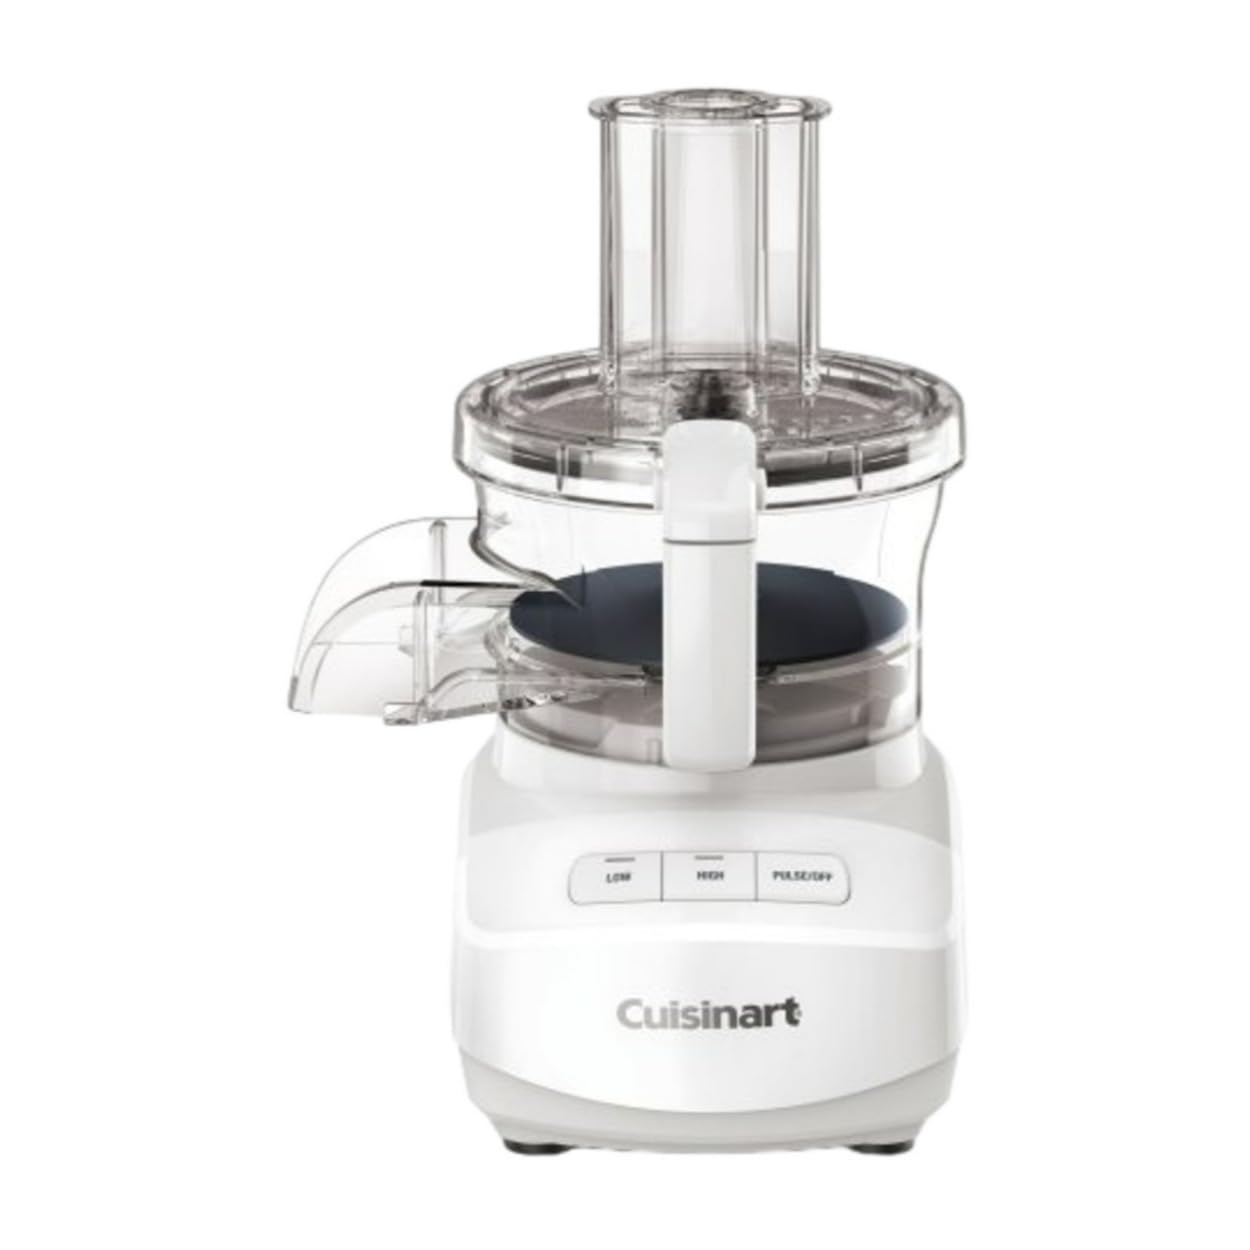 Cuisinart 9-Cup Continuous Feed Food Processor with Fine and Medium Reversible Shredding and Slicing Disc, Universal Blade, Continuous-Feed Attachment, and In-Bowl Storage (White)